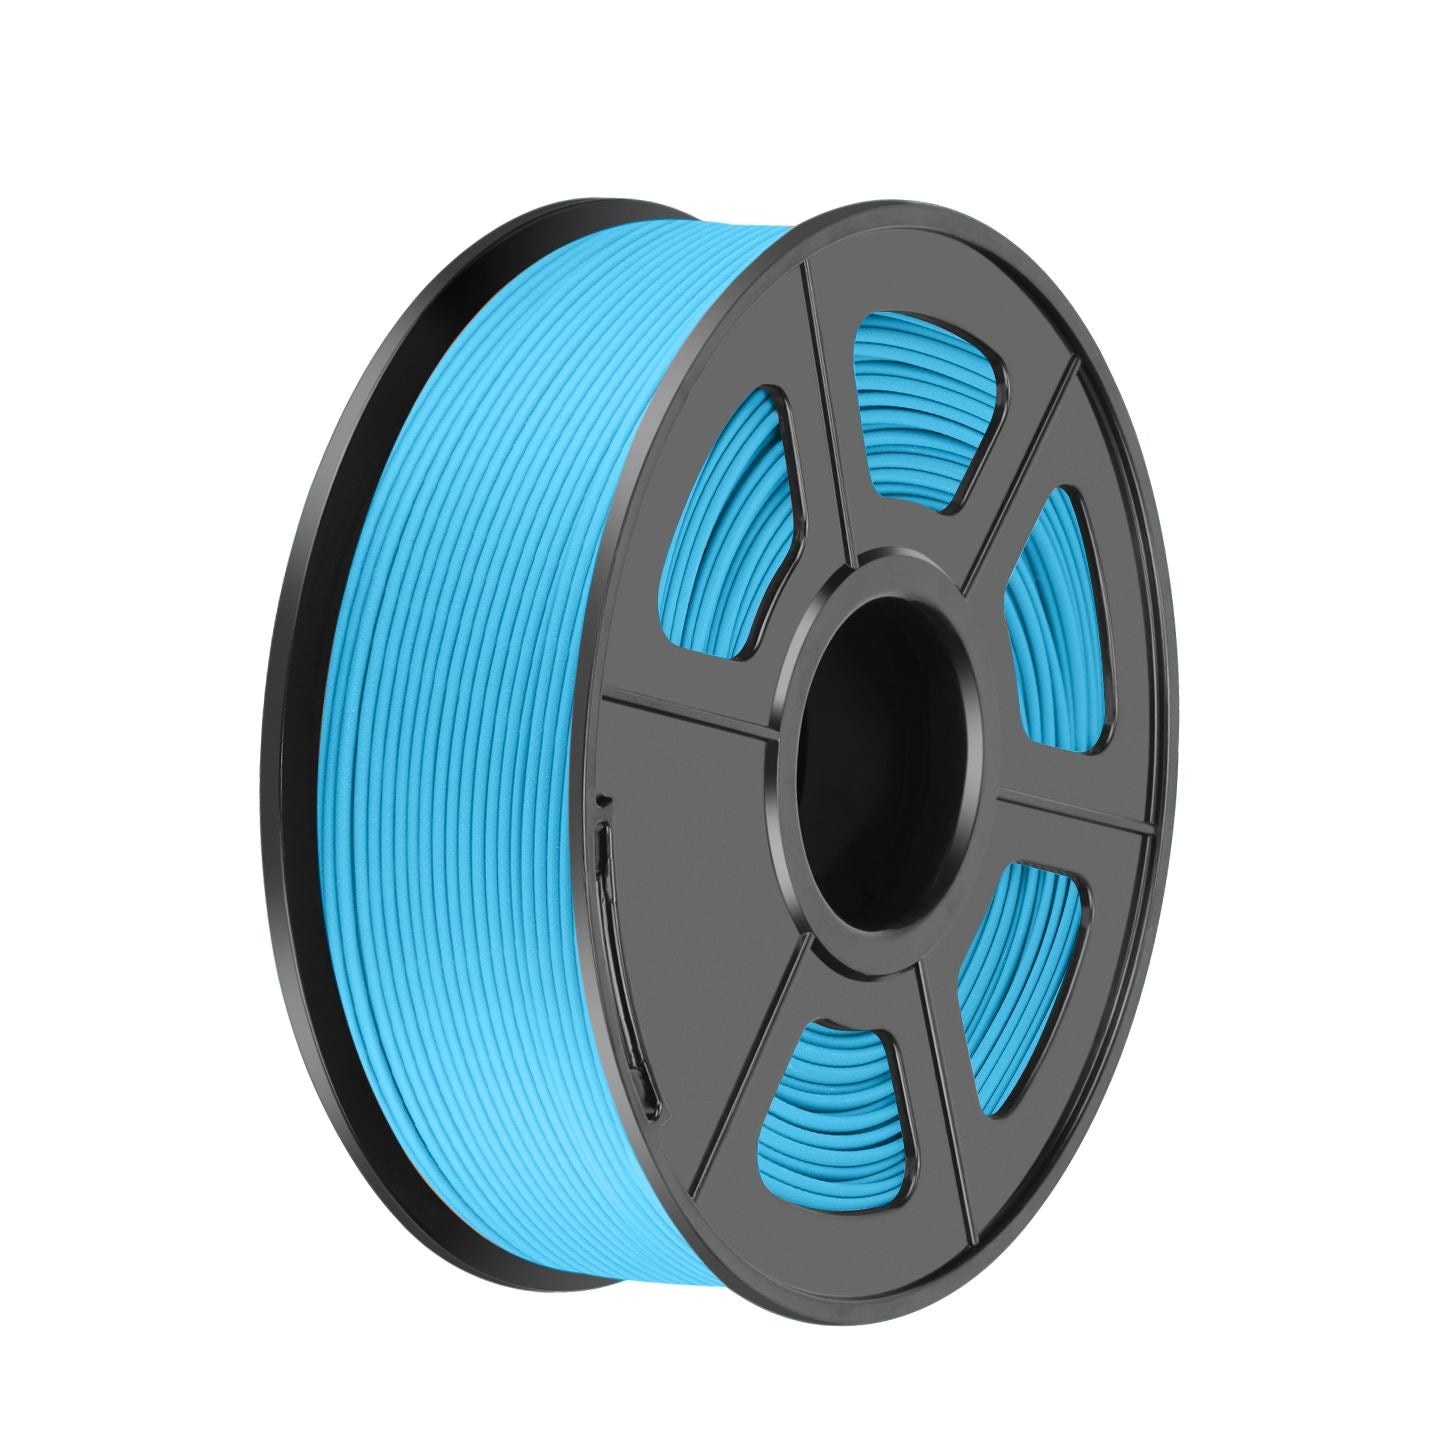 Creality 3D Printer Filament 1.75mm, Ender PLA Filament No-Tangling Smooth  Printing Without Clogging No Warping, Fit Most FDM 3D Printers, 1kg Spool,  Dimensional Accuracy +/- 0.02mm